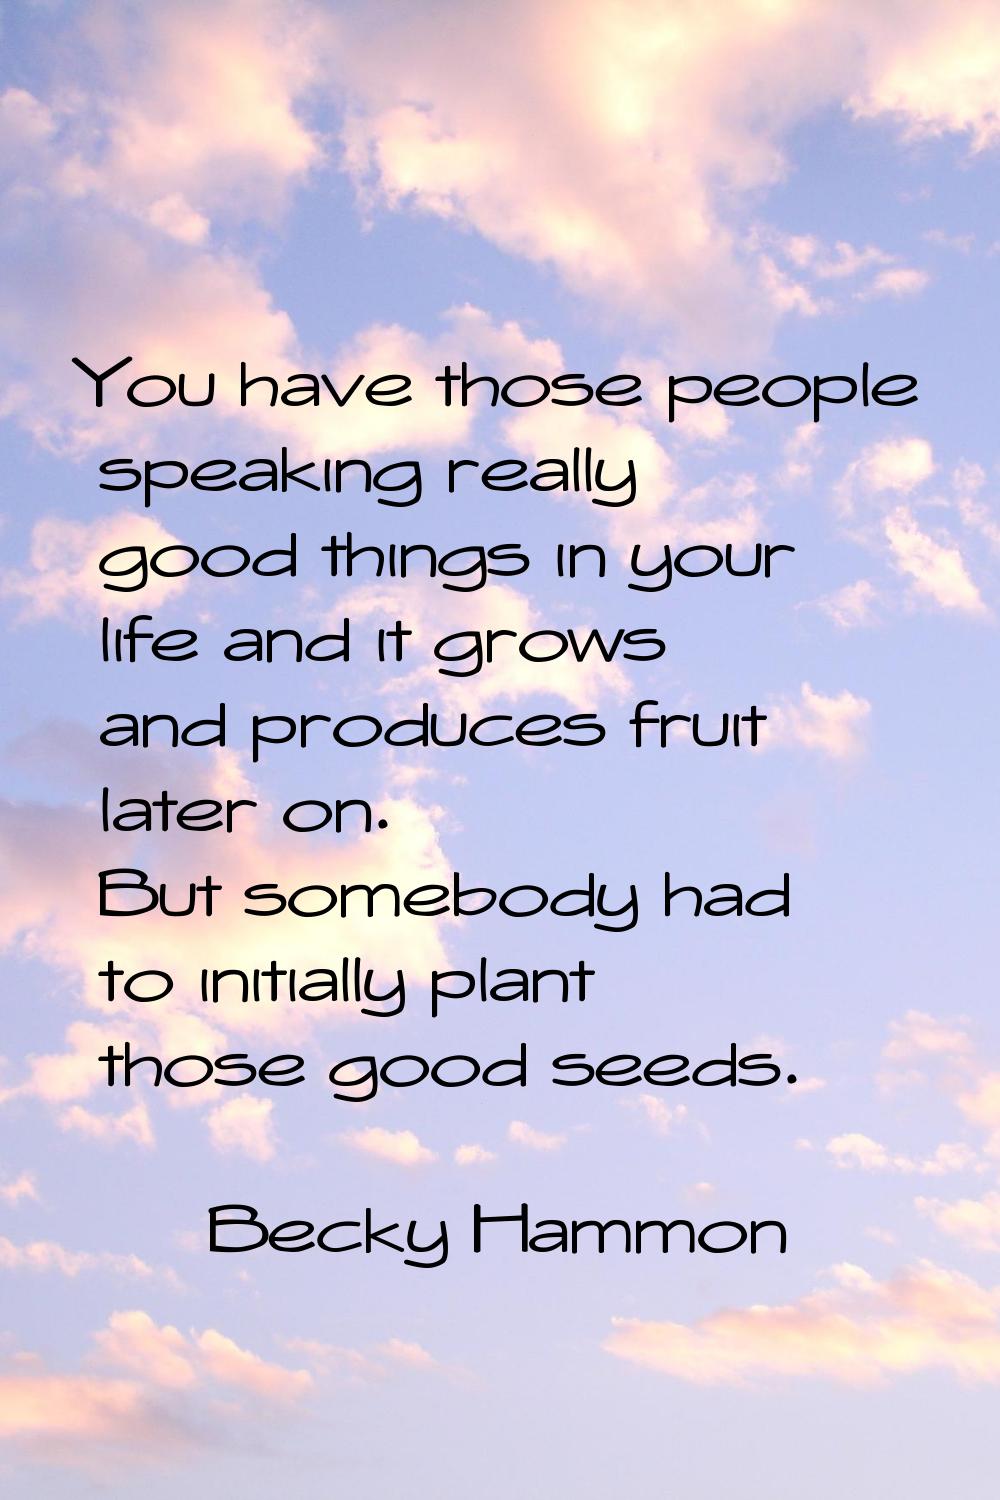 You have those people speaking really good things in your life and it grows and produces fruit late